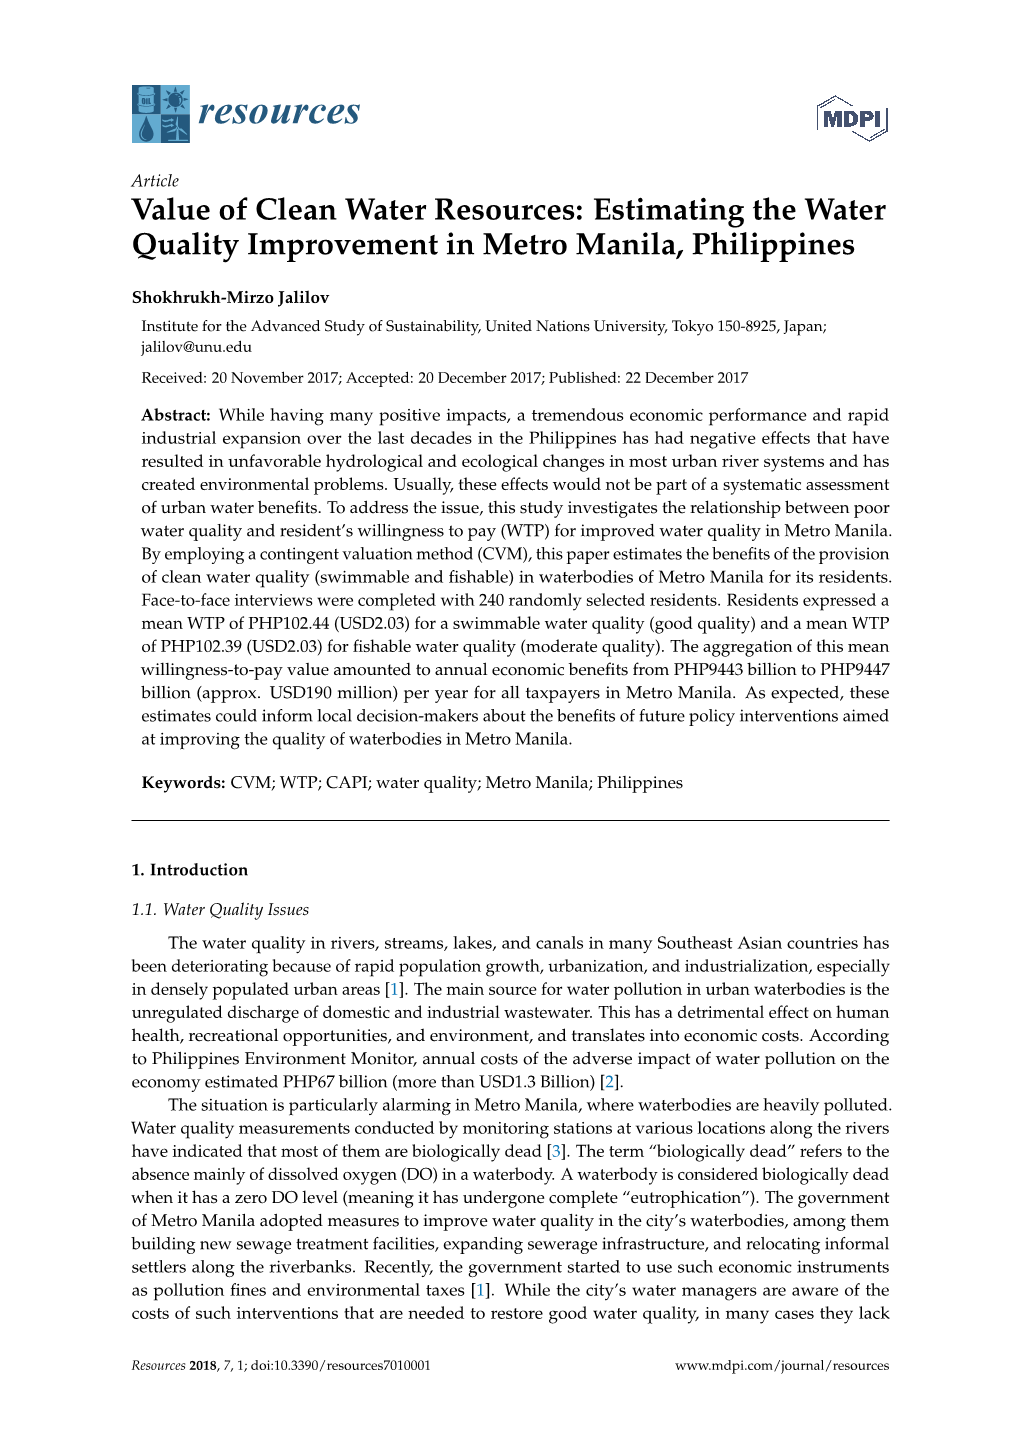 Value of Clean Water Resources: Estimating the Water Quality Improvement in Metro Manila, Philippines